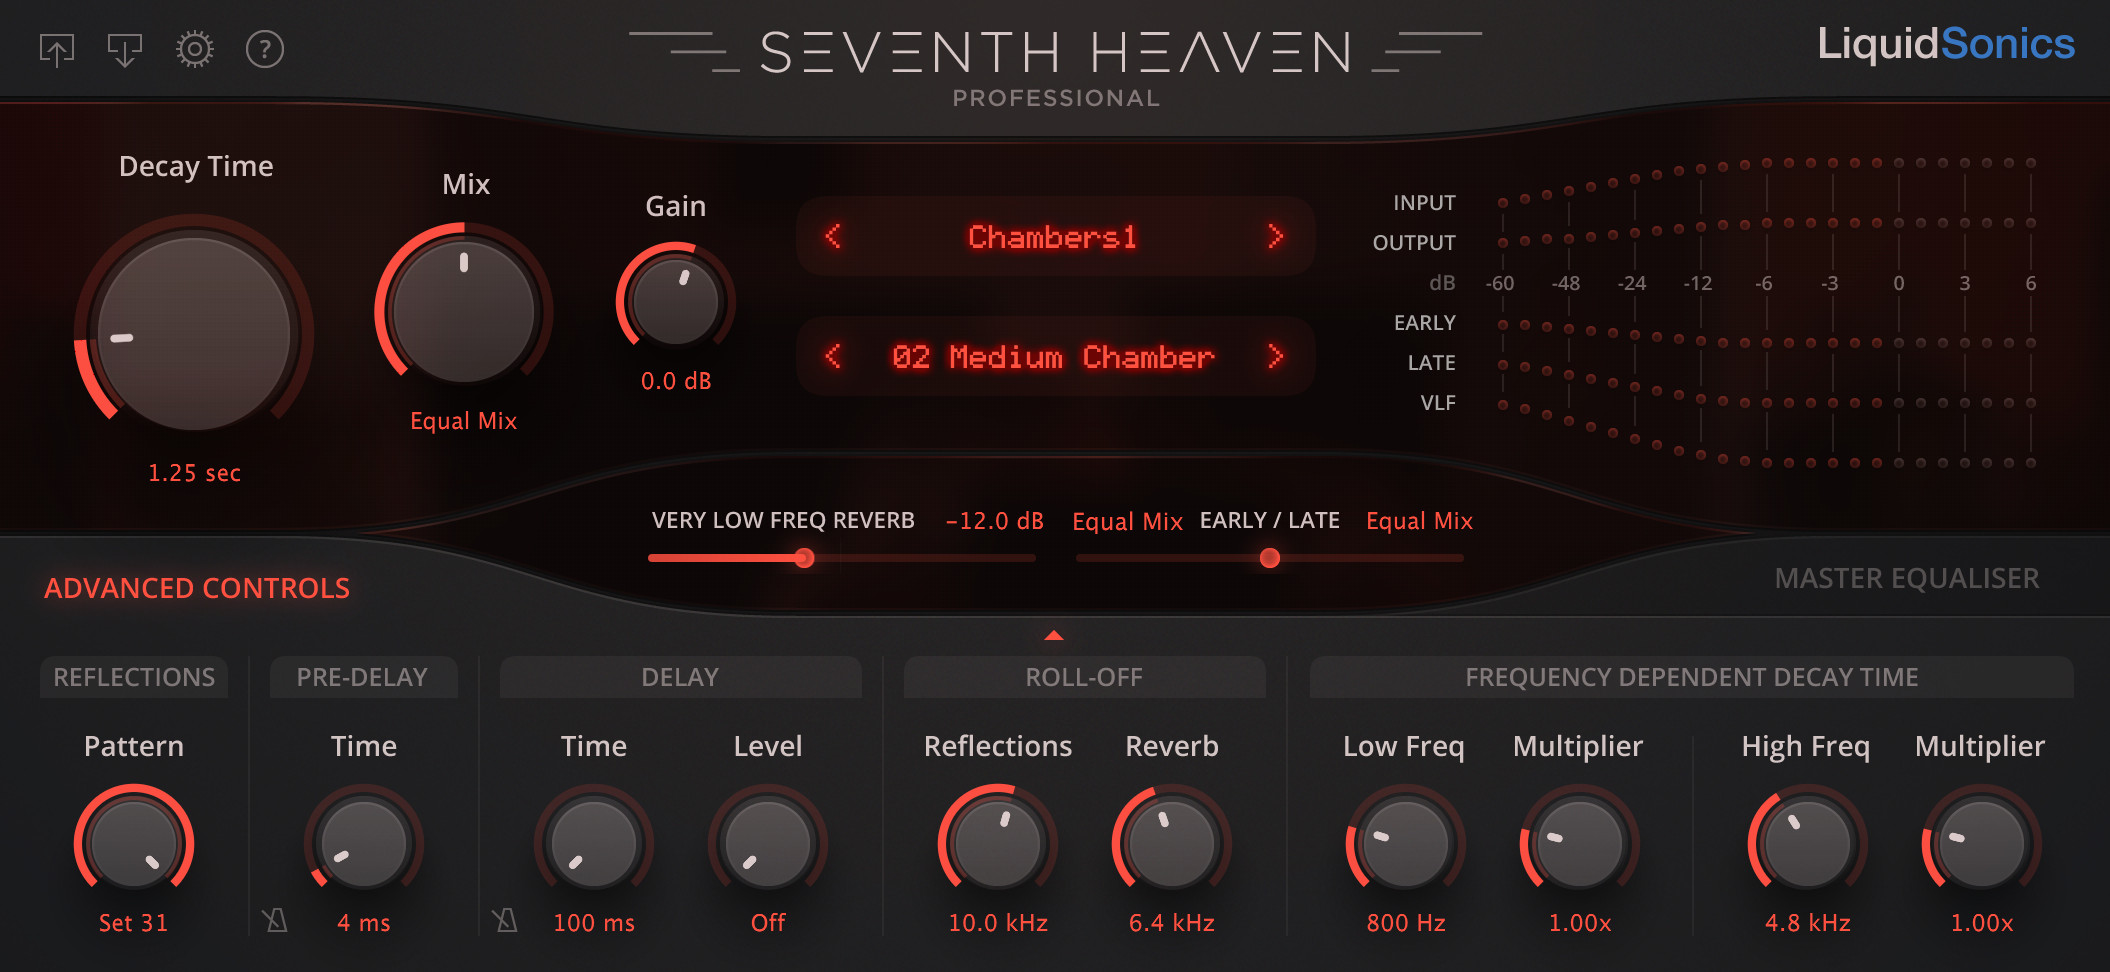 Seventh Heaven Professional (Expanded View)